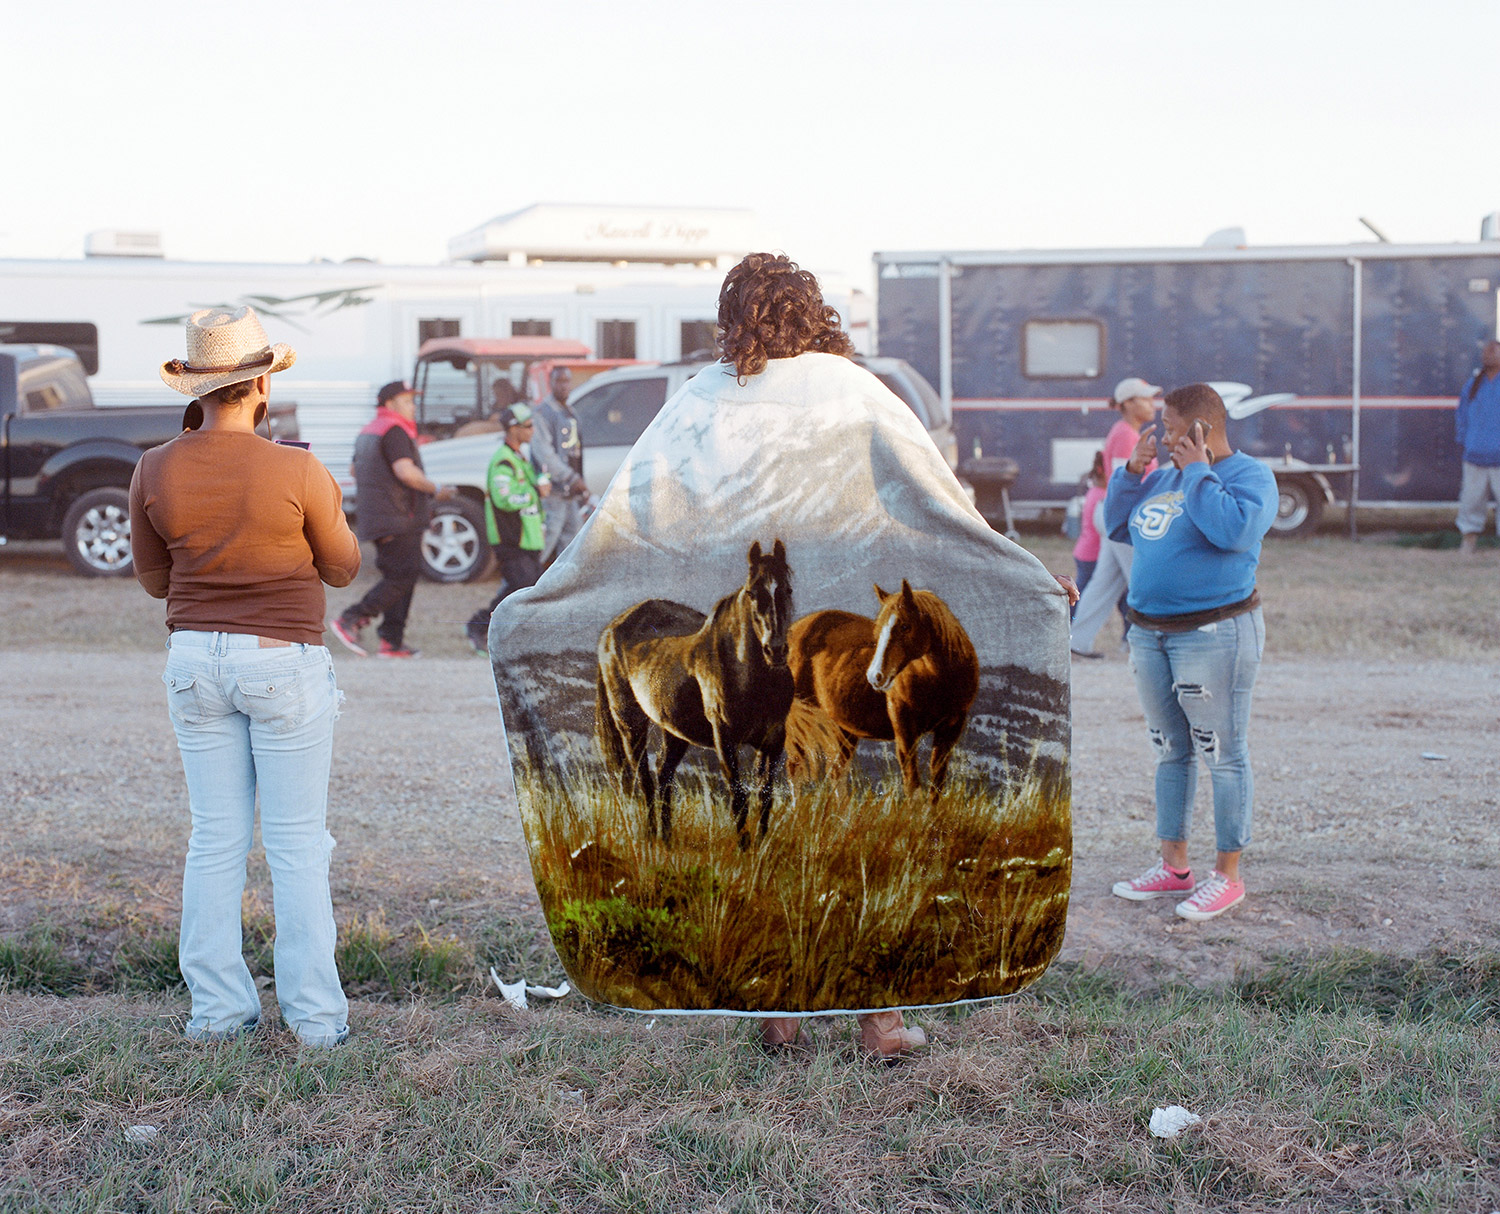 Women gather at a trail ride in Southern Louisiana. 2014